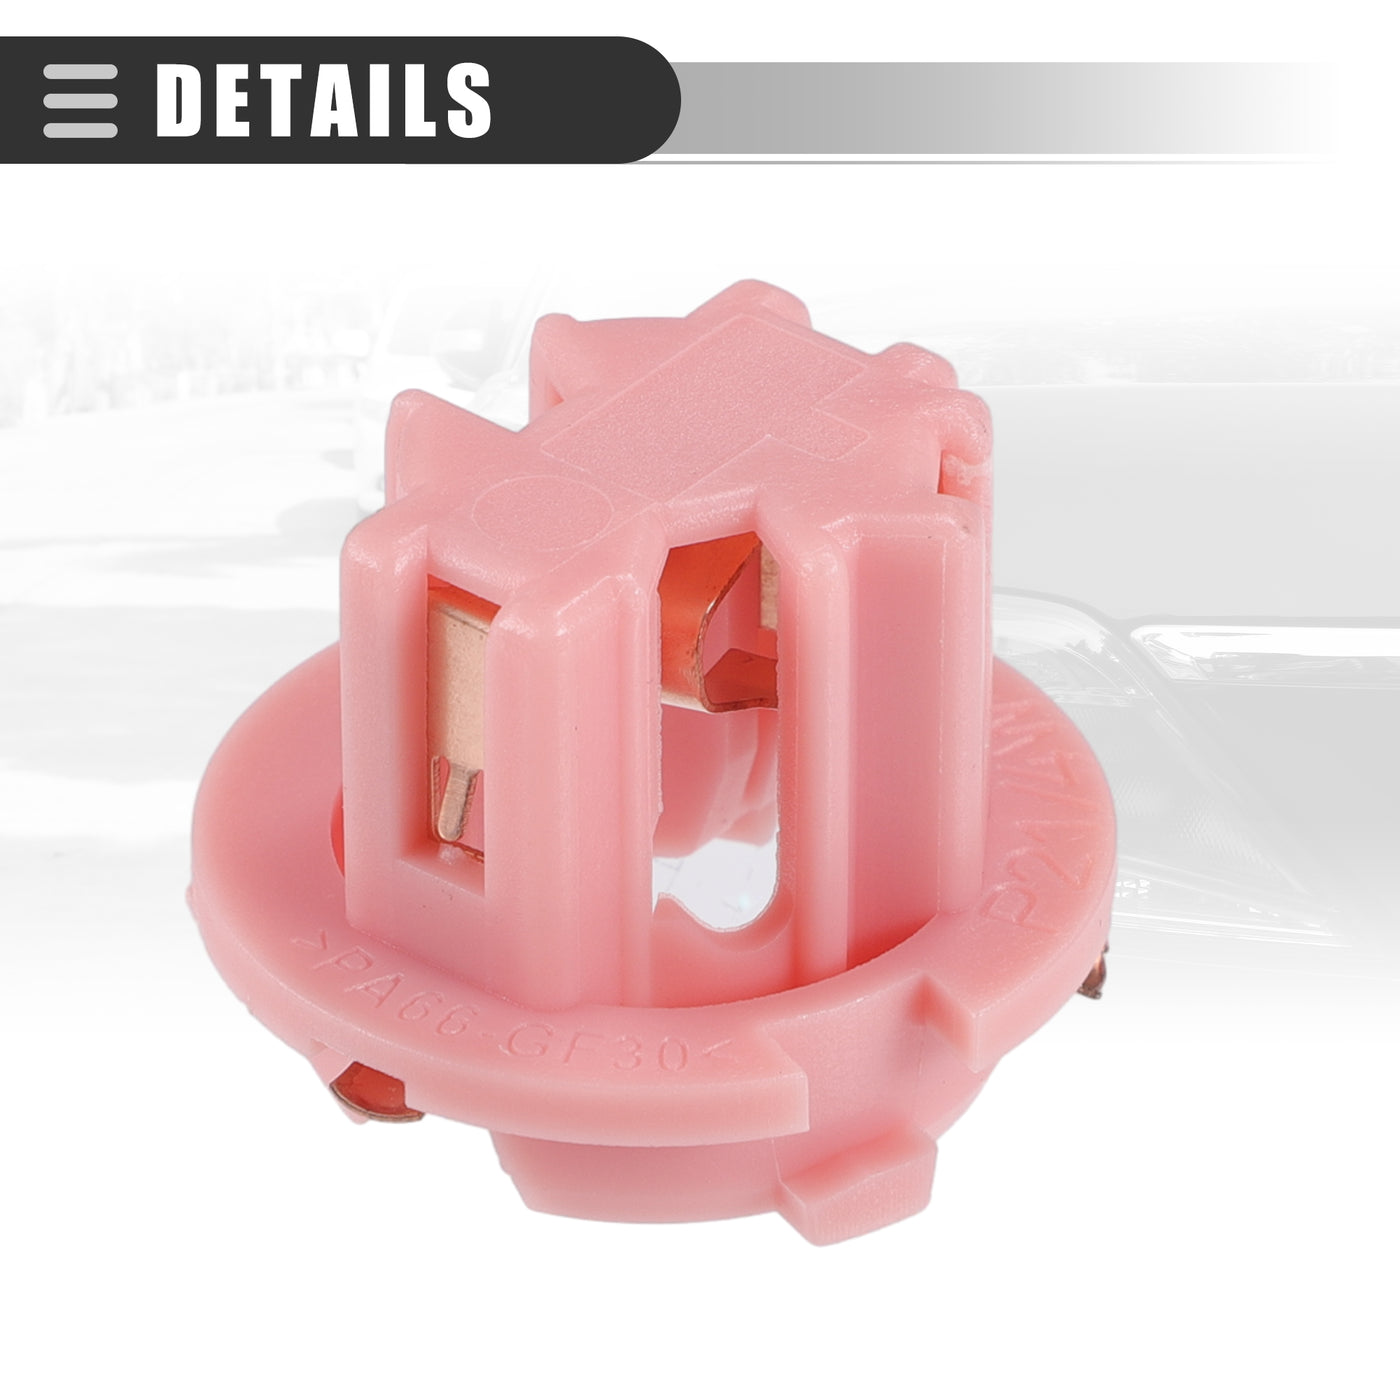 Motoforti Rear Tail Light Lamp Bulb Socket, for Mercedes S Class W220 1998-2006, ABS, No.A2108260082/63218386805, Pink